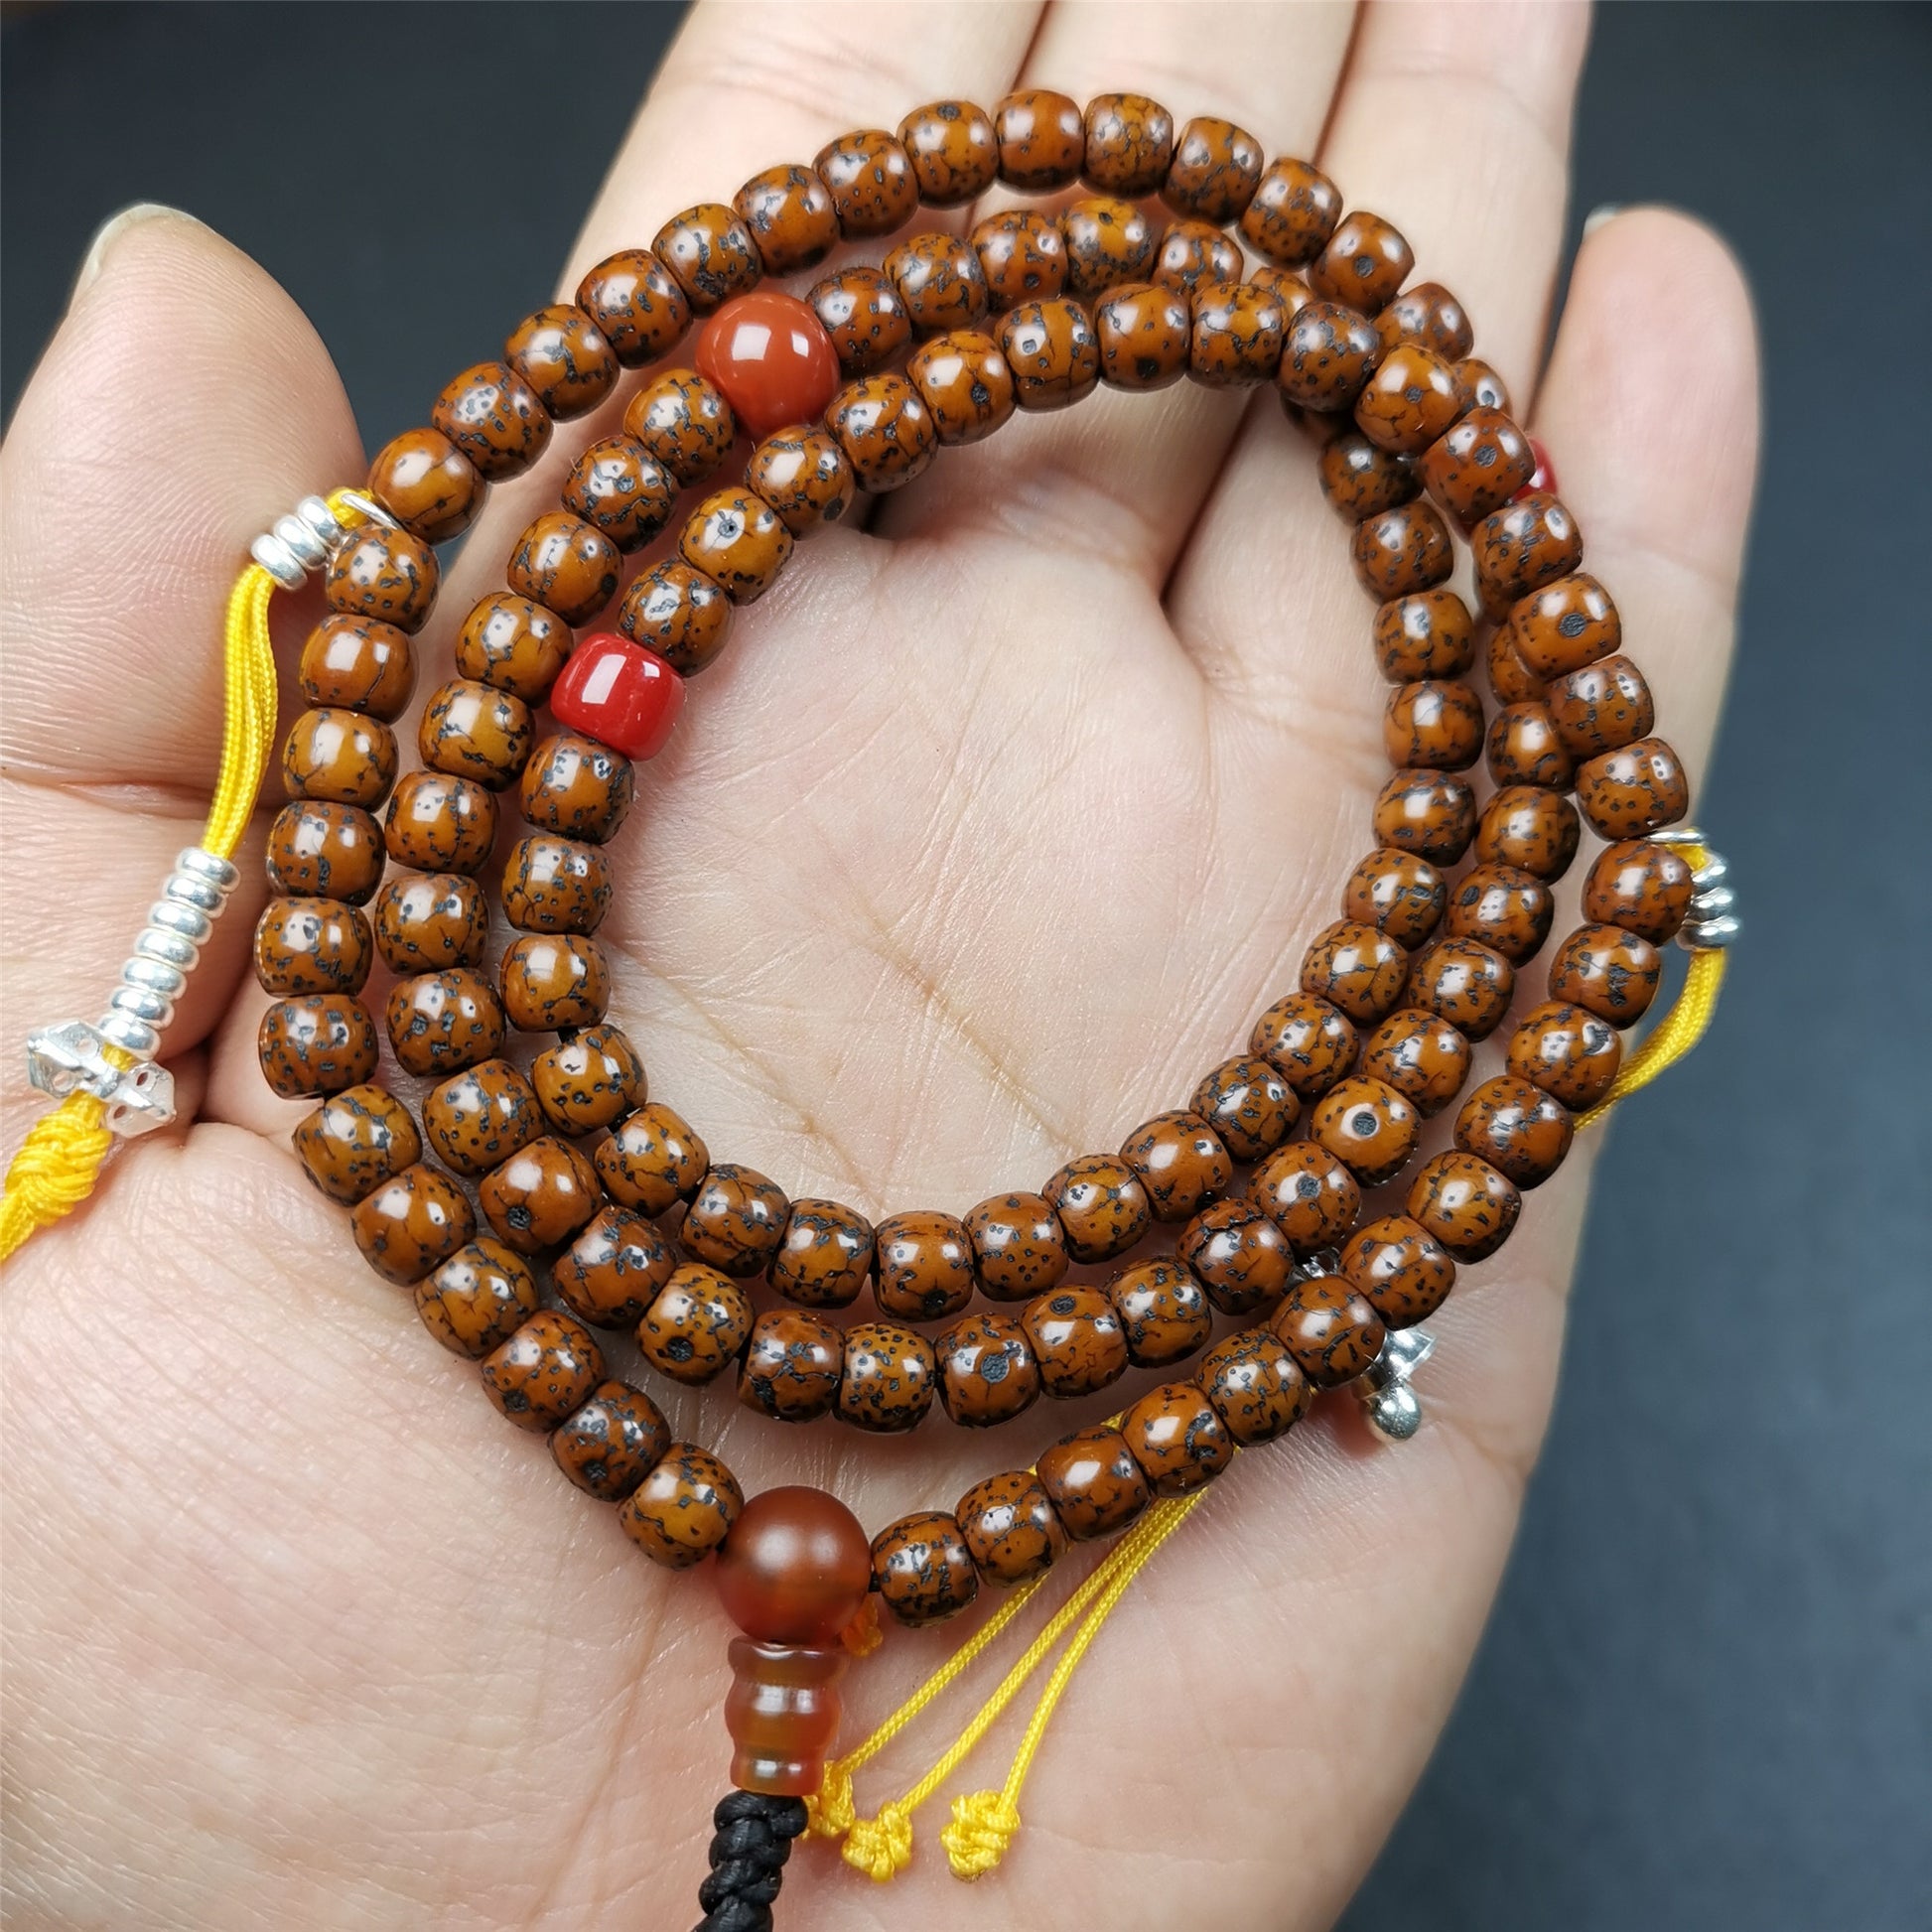 This old lotus seed mala was handmade from tibetan crafts man in Baiyu County,about 20 years old. It's composed of 108 lotus seed beads,then add some agate beads,1 pair of silver bead counters,and agate guru bead on it.